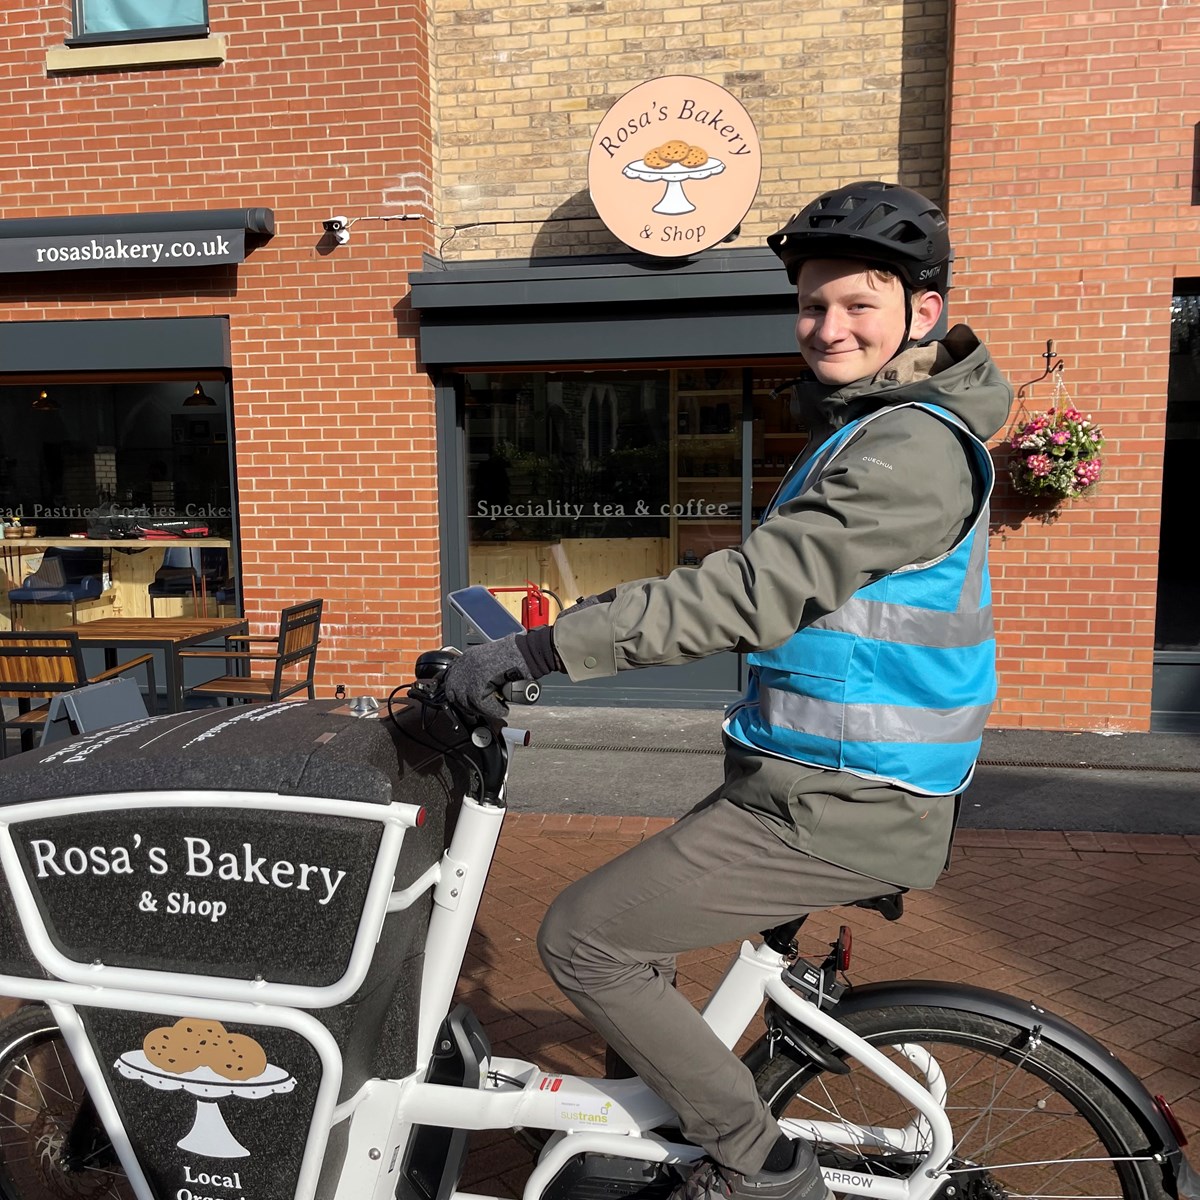 Ruben at Rosa's Bakery delivering baked goods on his e-bike. Rosa's Bakery can be found on Instagram at rosasbakery.co.uk